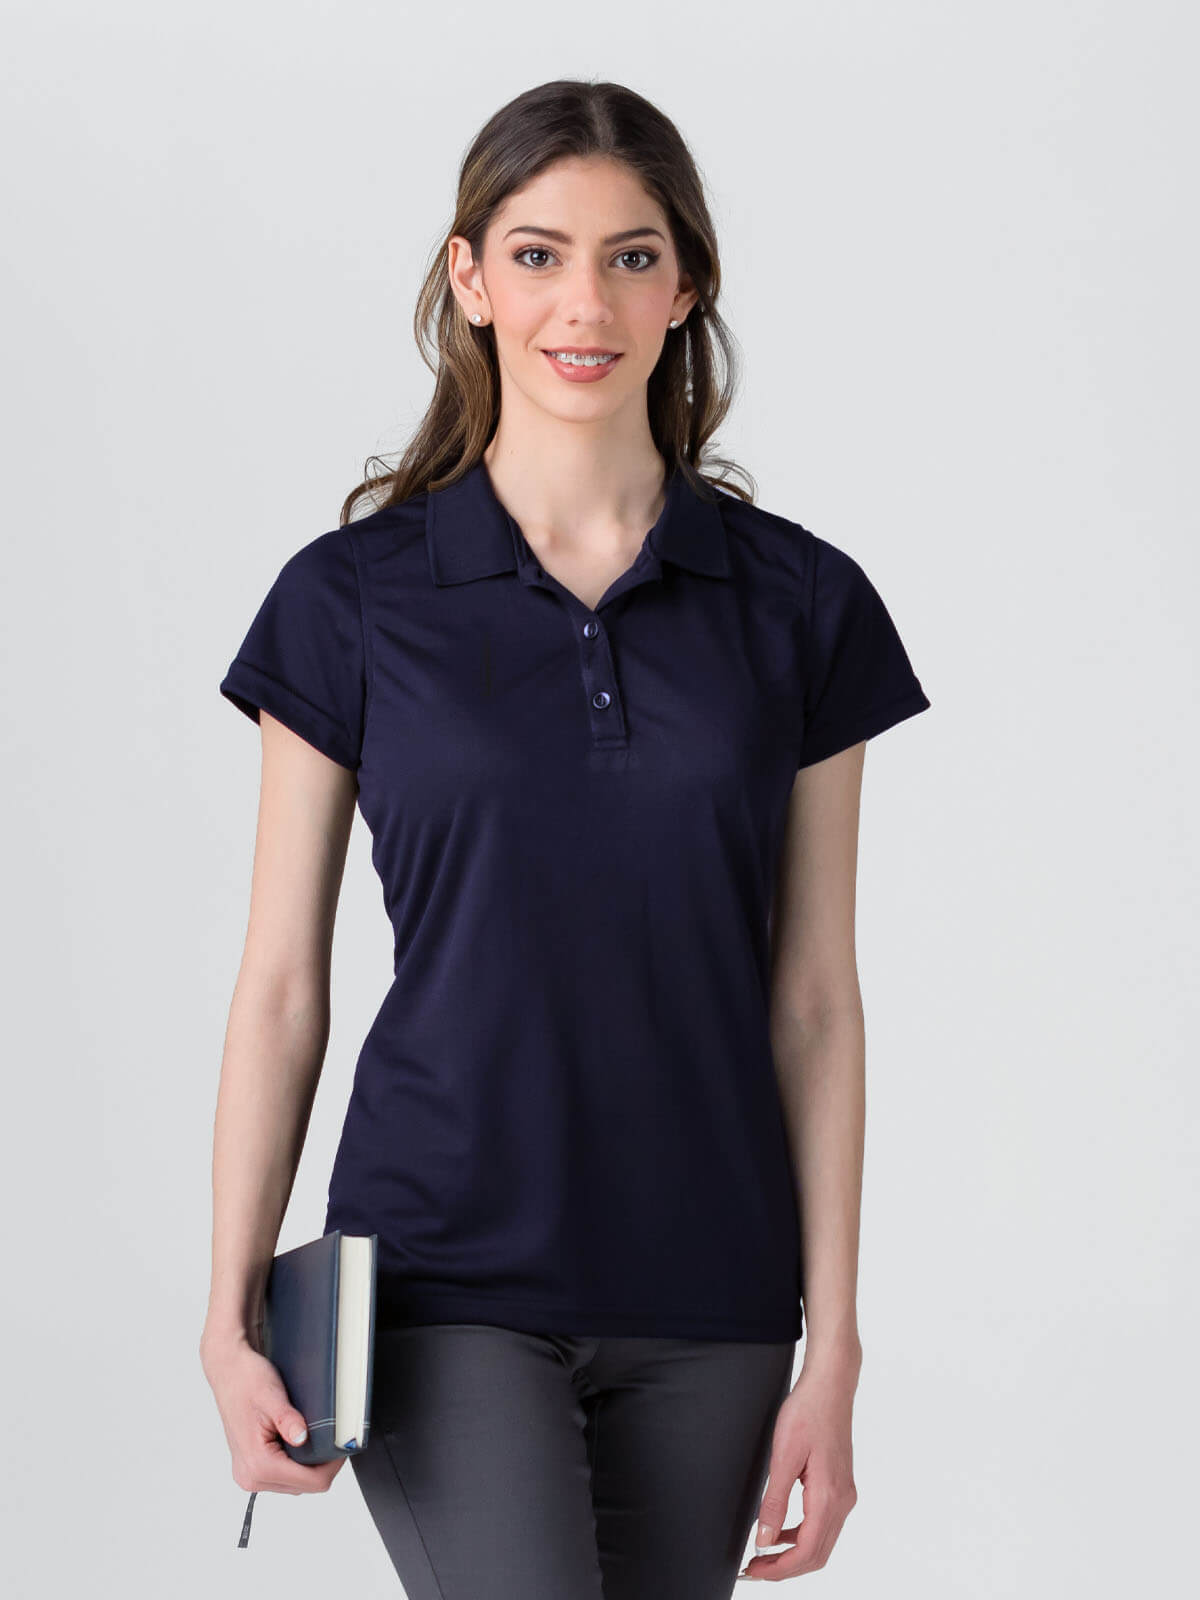 USA Dry Fit Polo Women